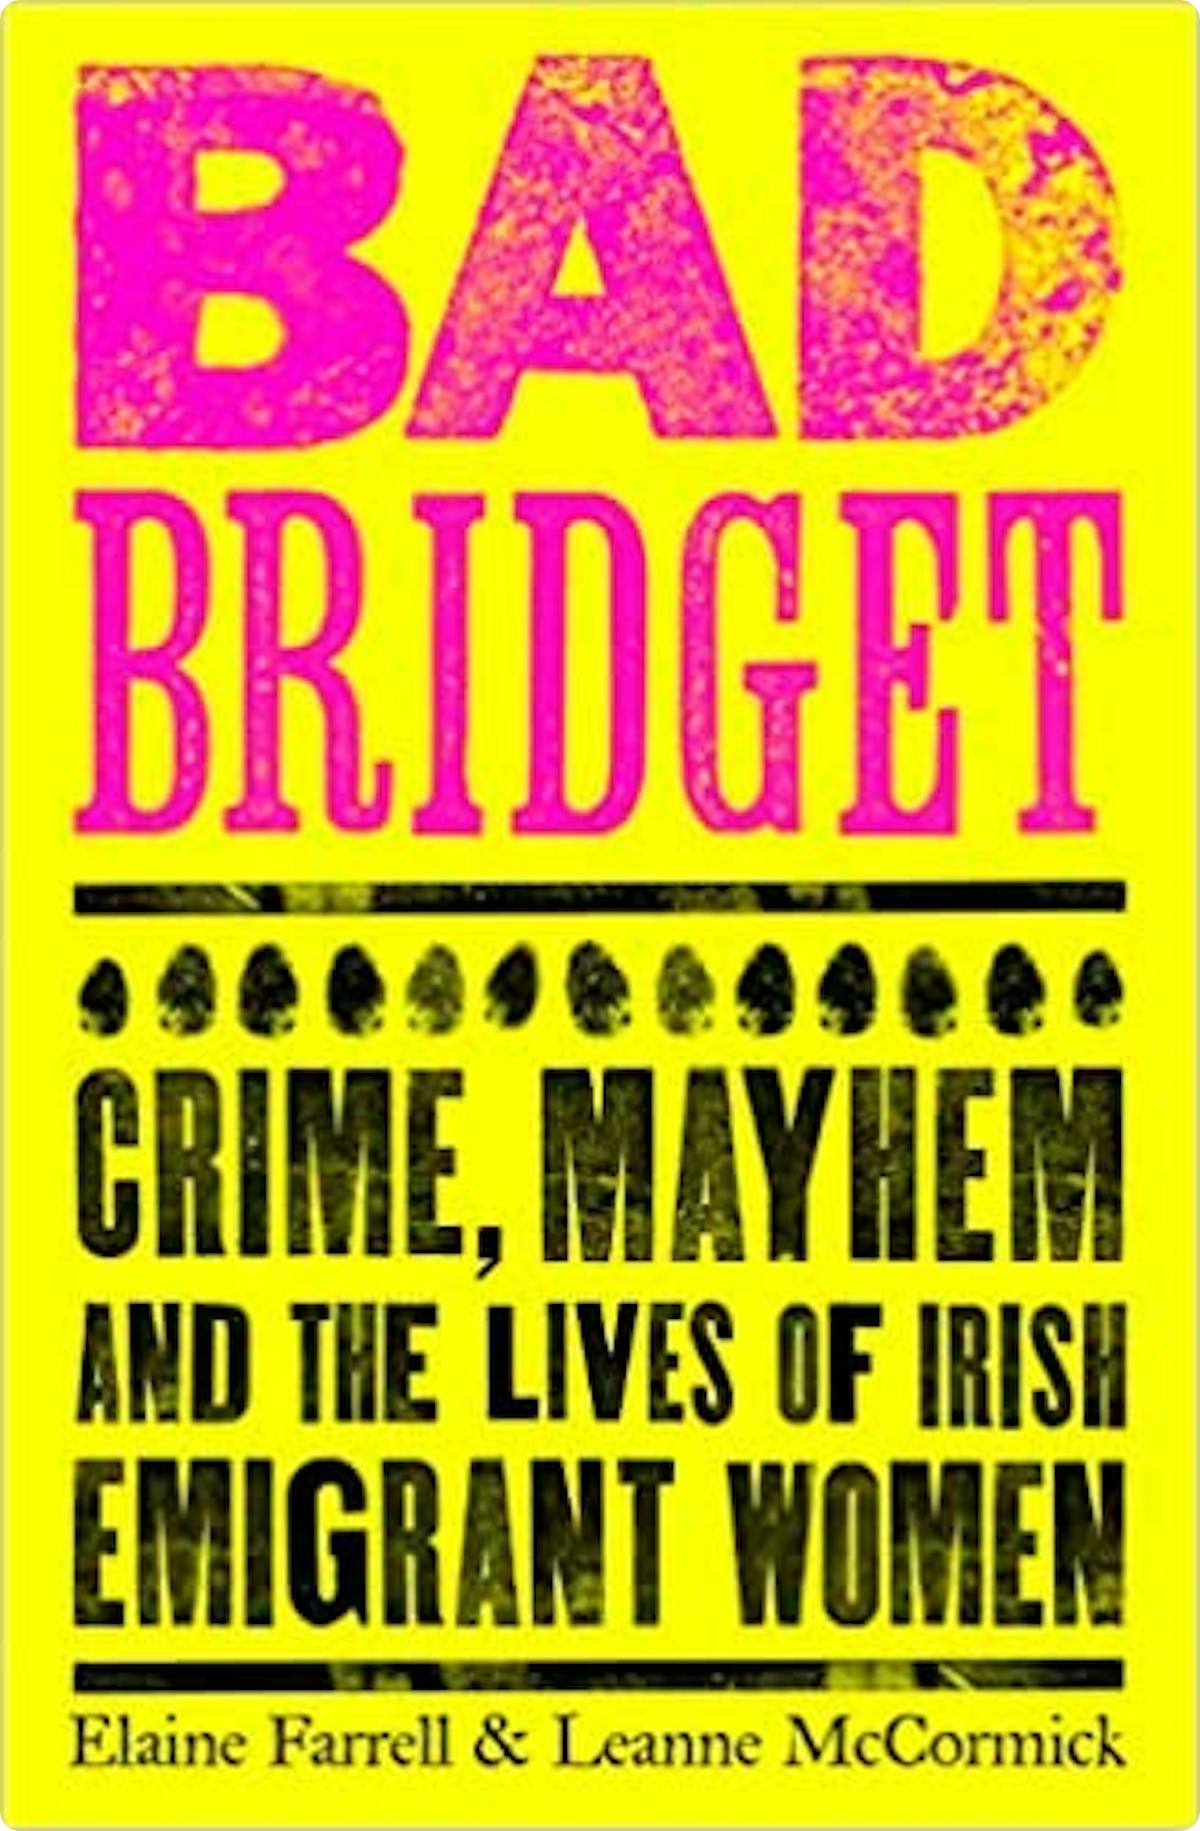 Bad Bridget by Elaine Farrell and Leanne McCormick